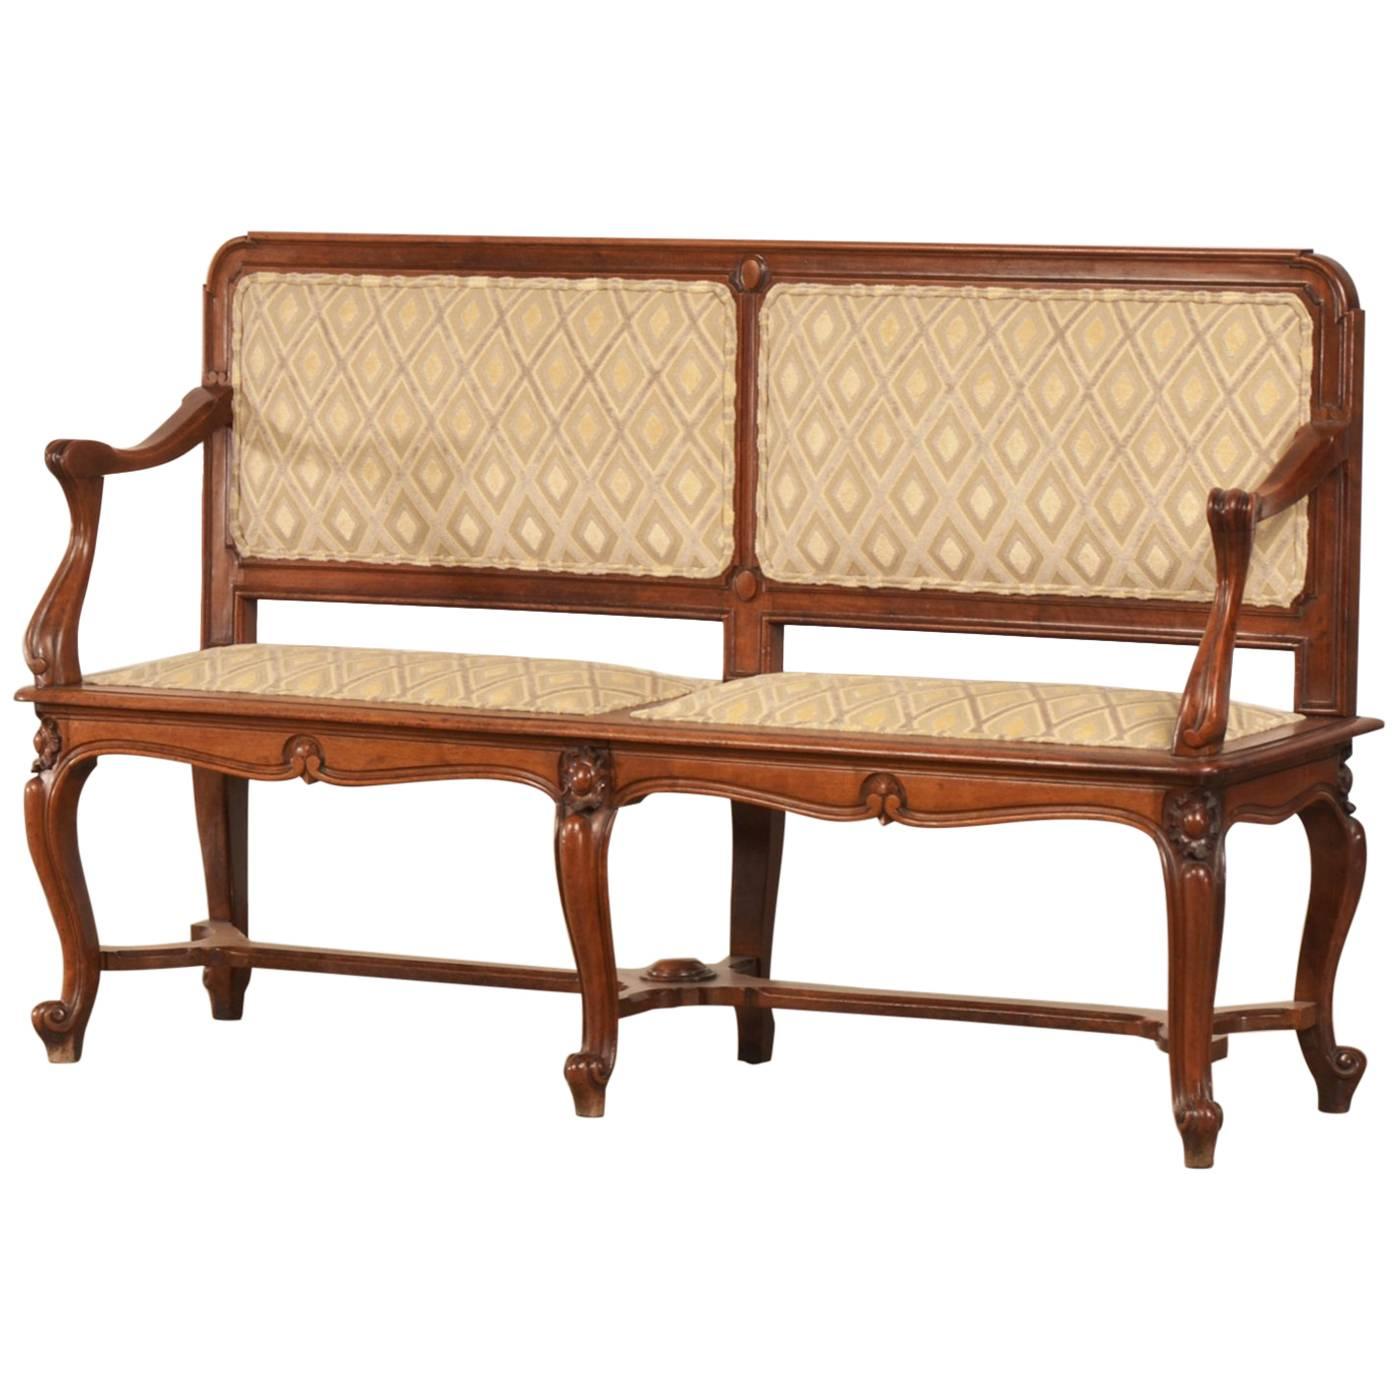 Antique French Art Nouveau Period Walnut Settee Bench, circa 1900 For Sale